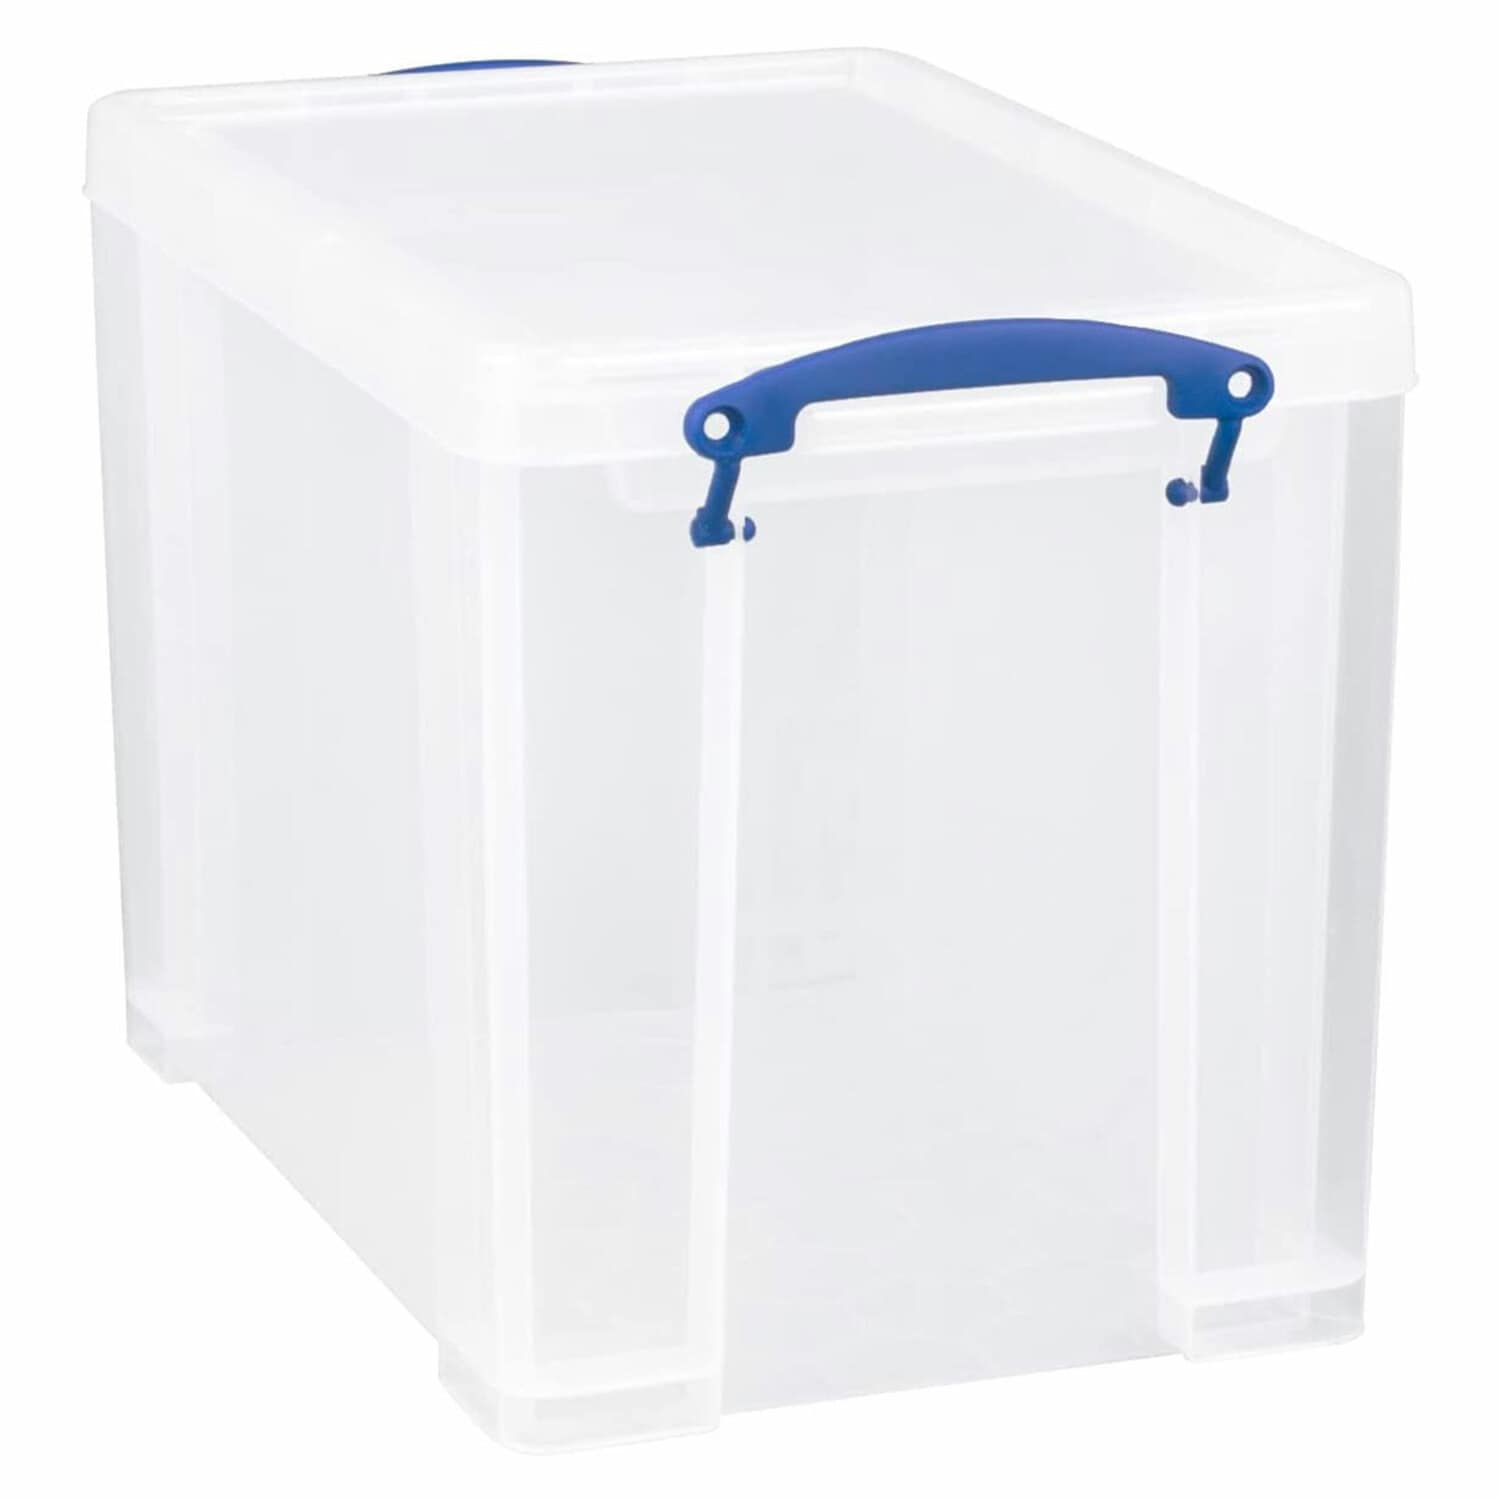 Clear Weathertight Totes